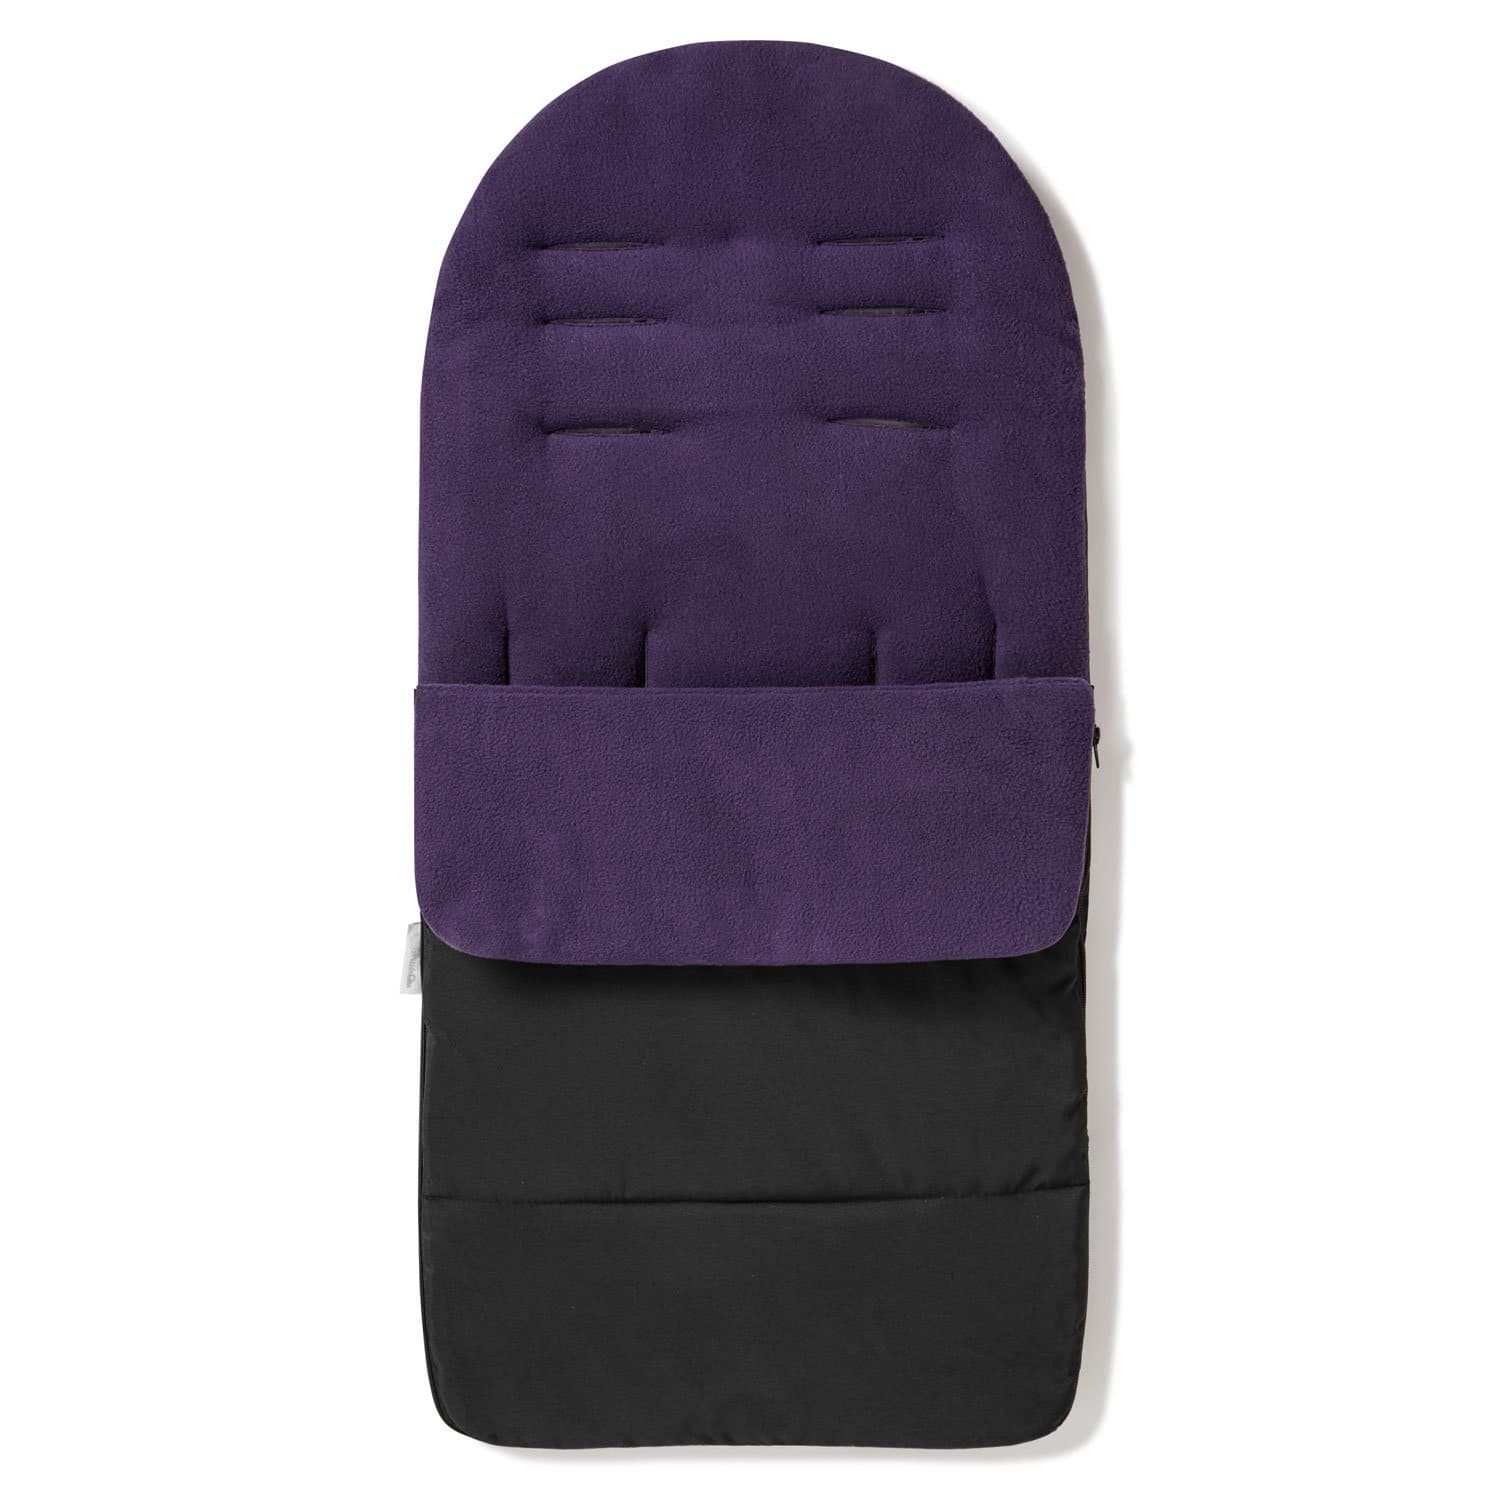 Premium Footmuff / Cosy Toes Compatible with Britax - Plum Purple / Fits All Models | For Your Little One